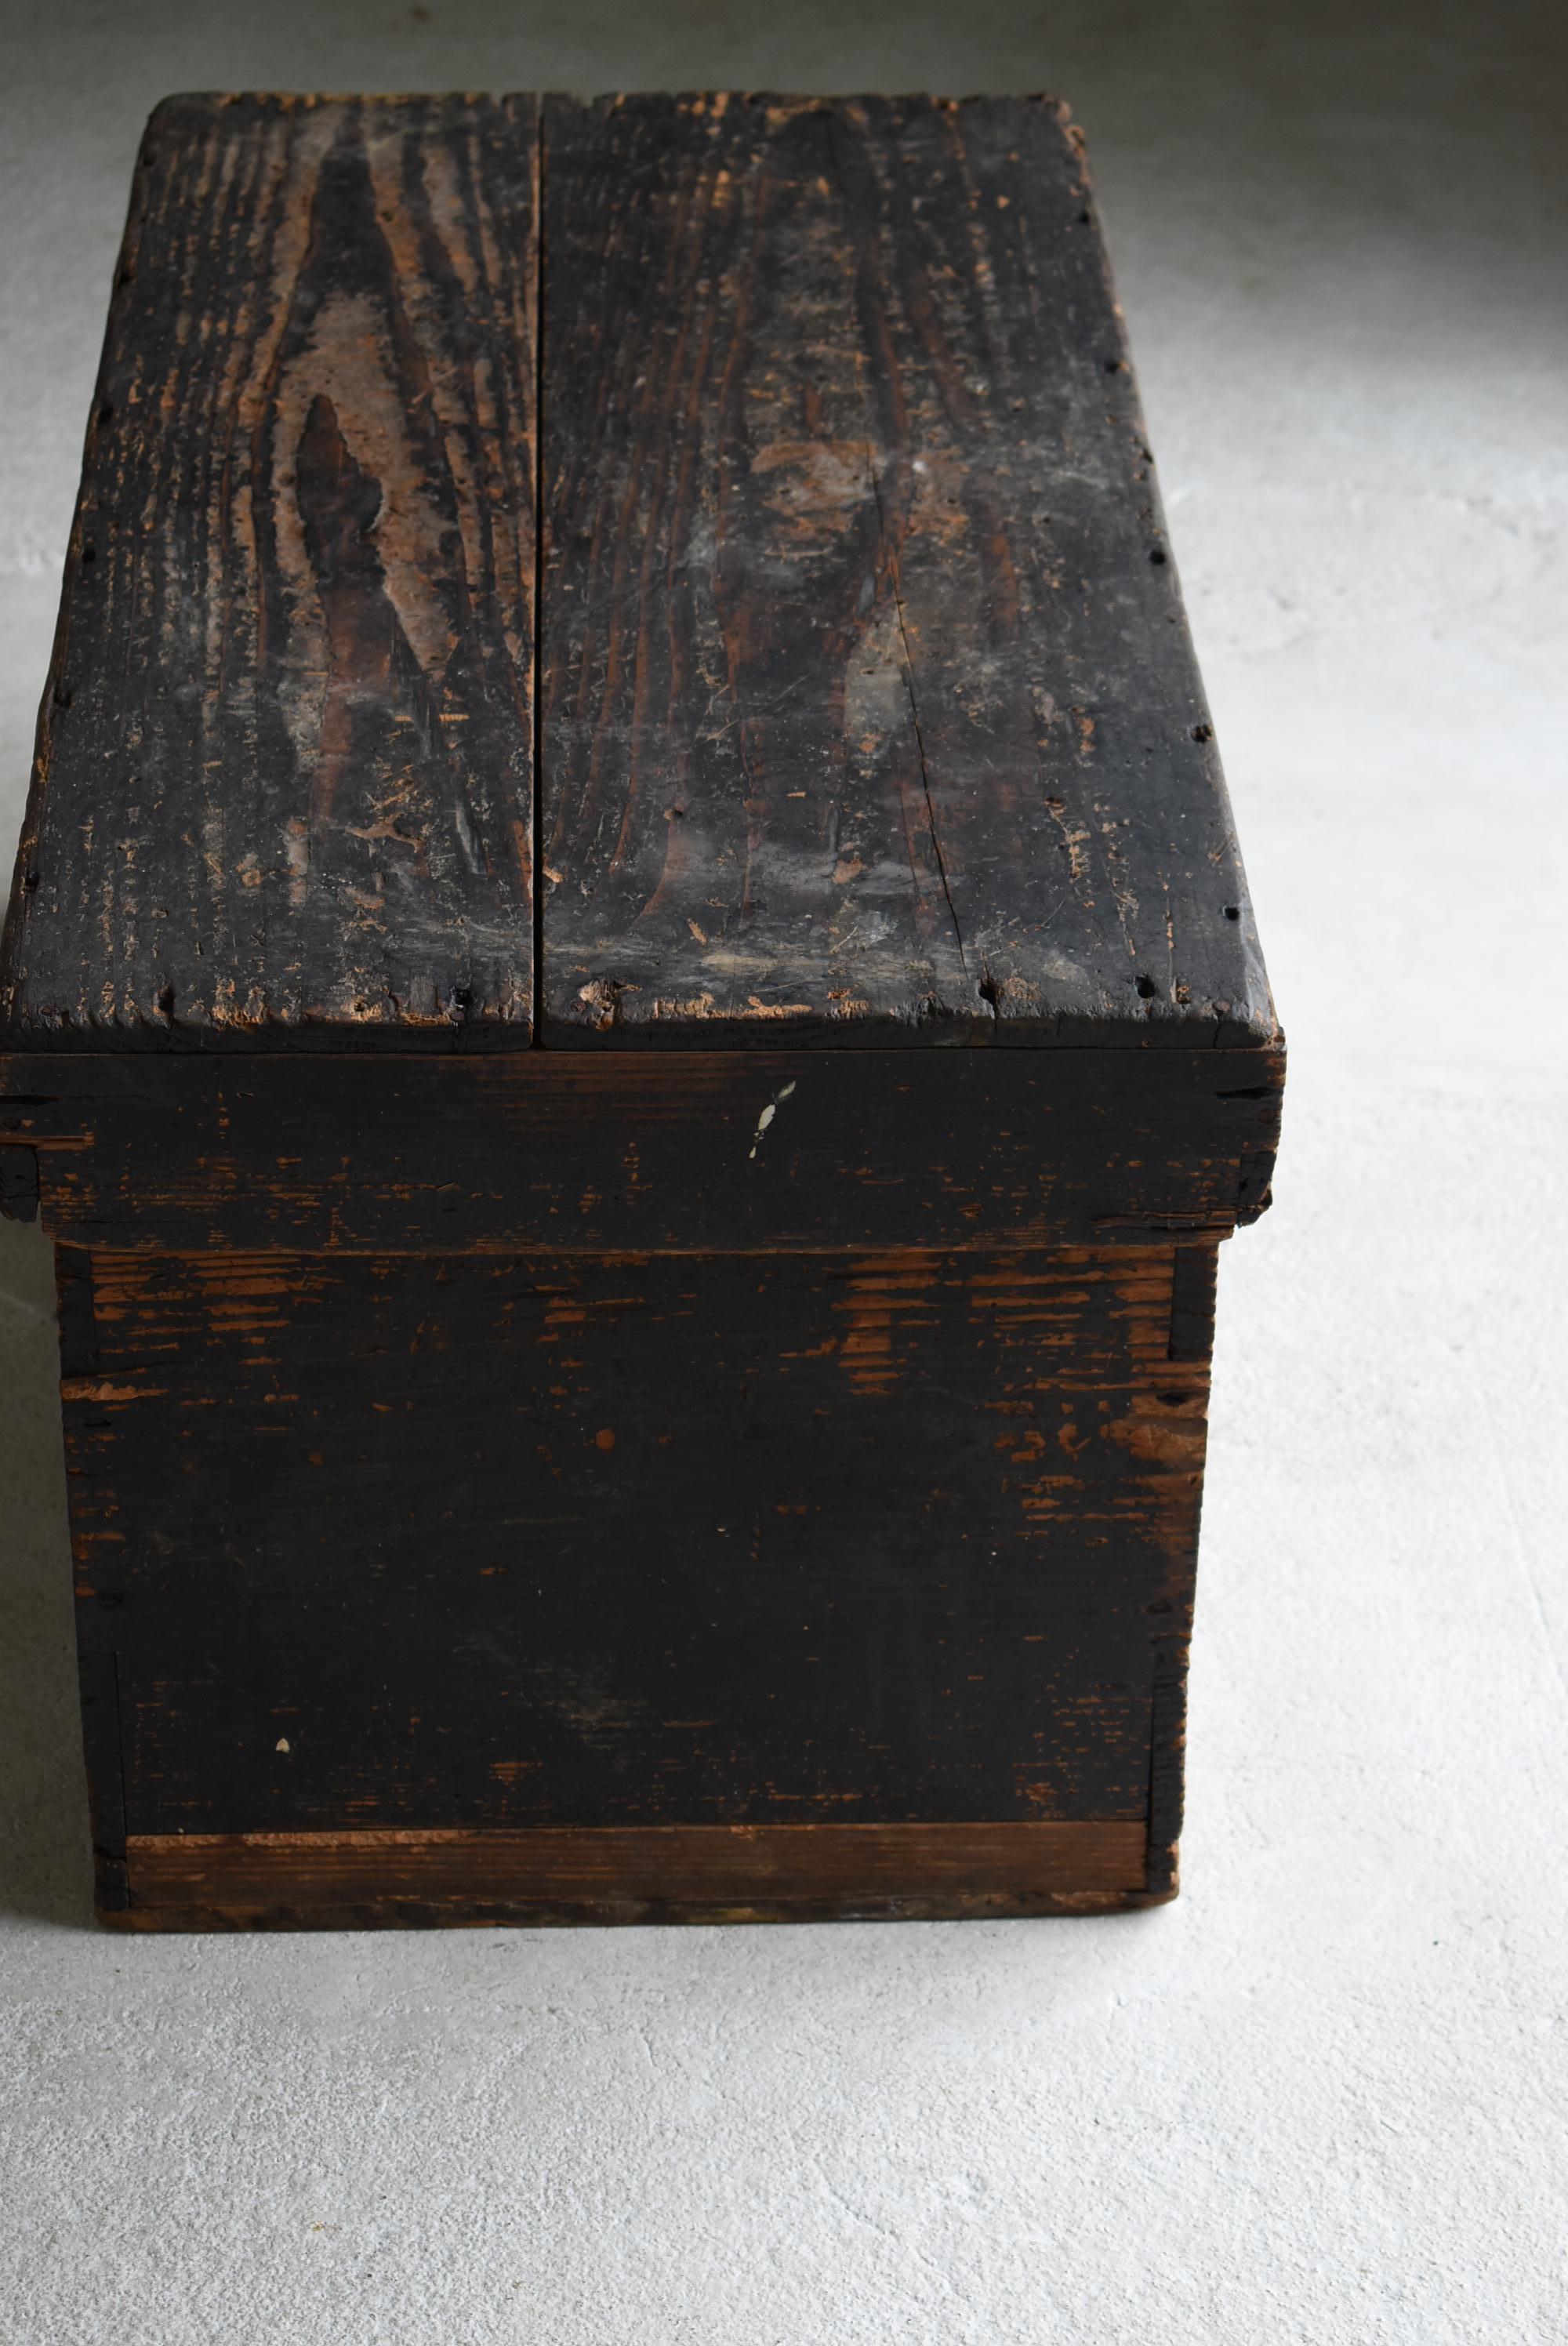 Cedar Japanese Old Wooden Box 1860-1900 / Antique Storage Sofa Table Coffee Table Side